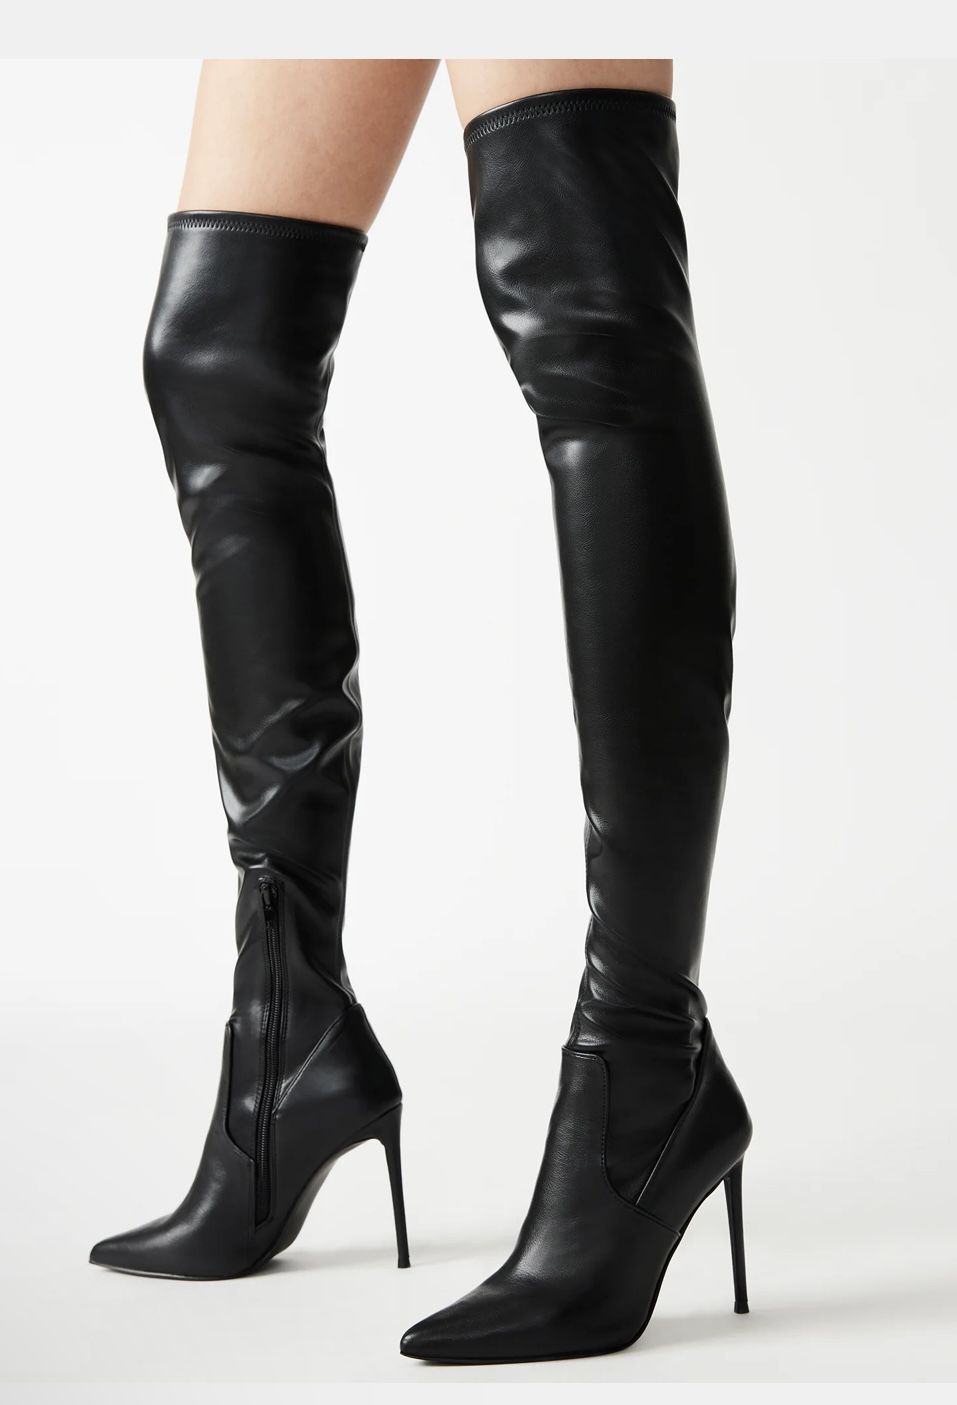 Vava Black And Red Boots Steve Madden 